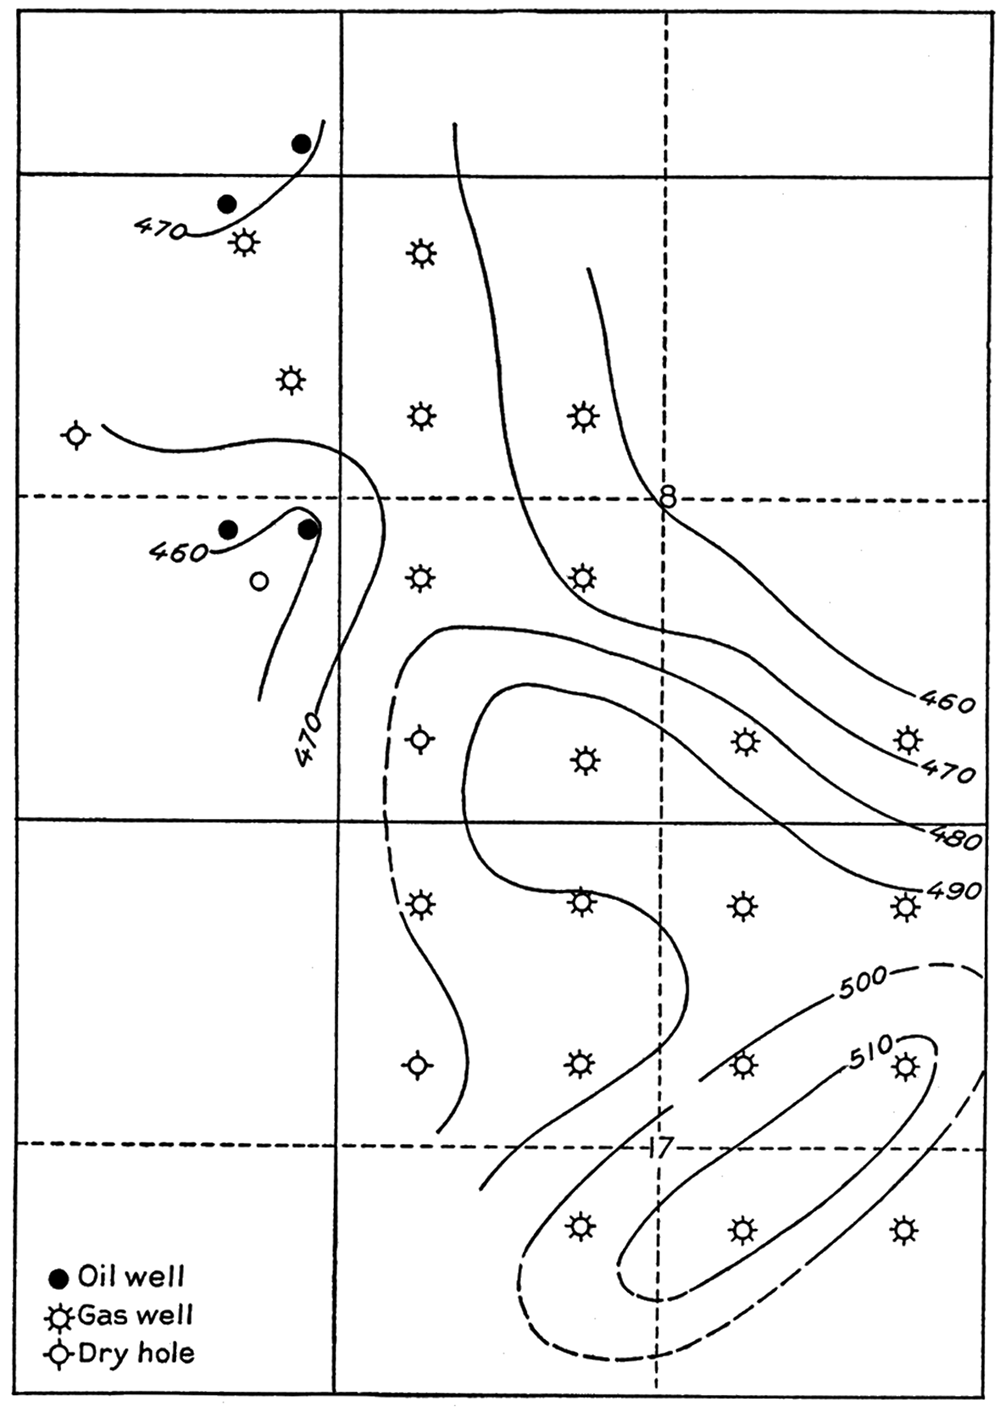 Contour map of the Boyer dome, showing structure of the 900-foot gas sand.